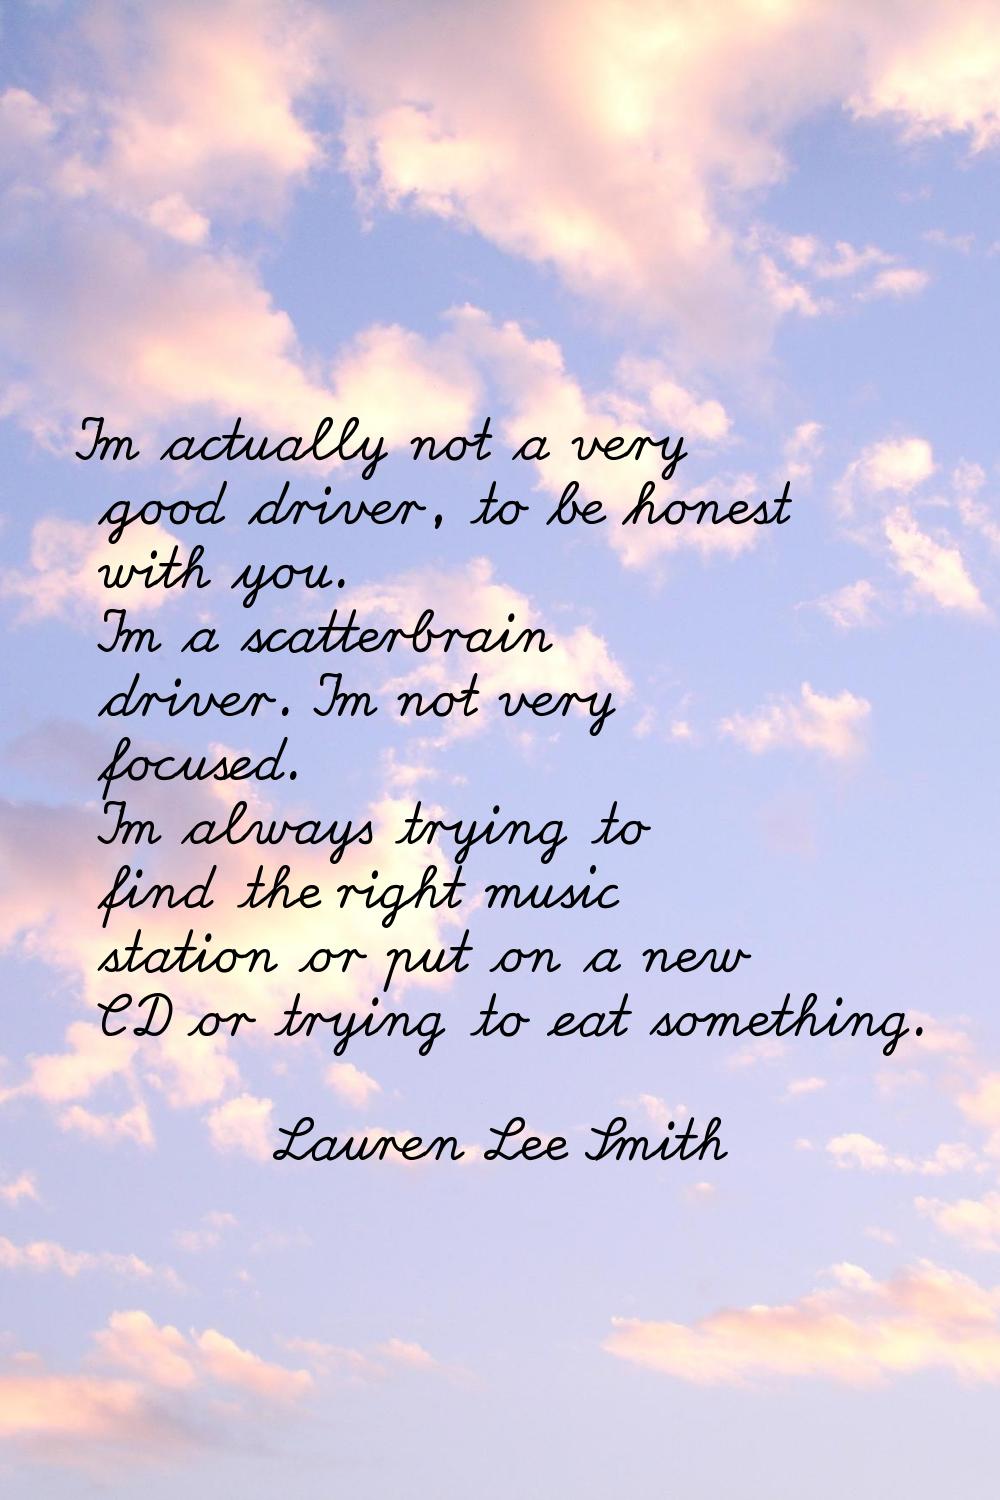 I'm actually not a very good driver, to be honest with you. I'm a scatterbrain driver. I'm not very